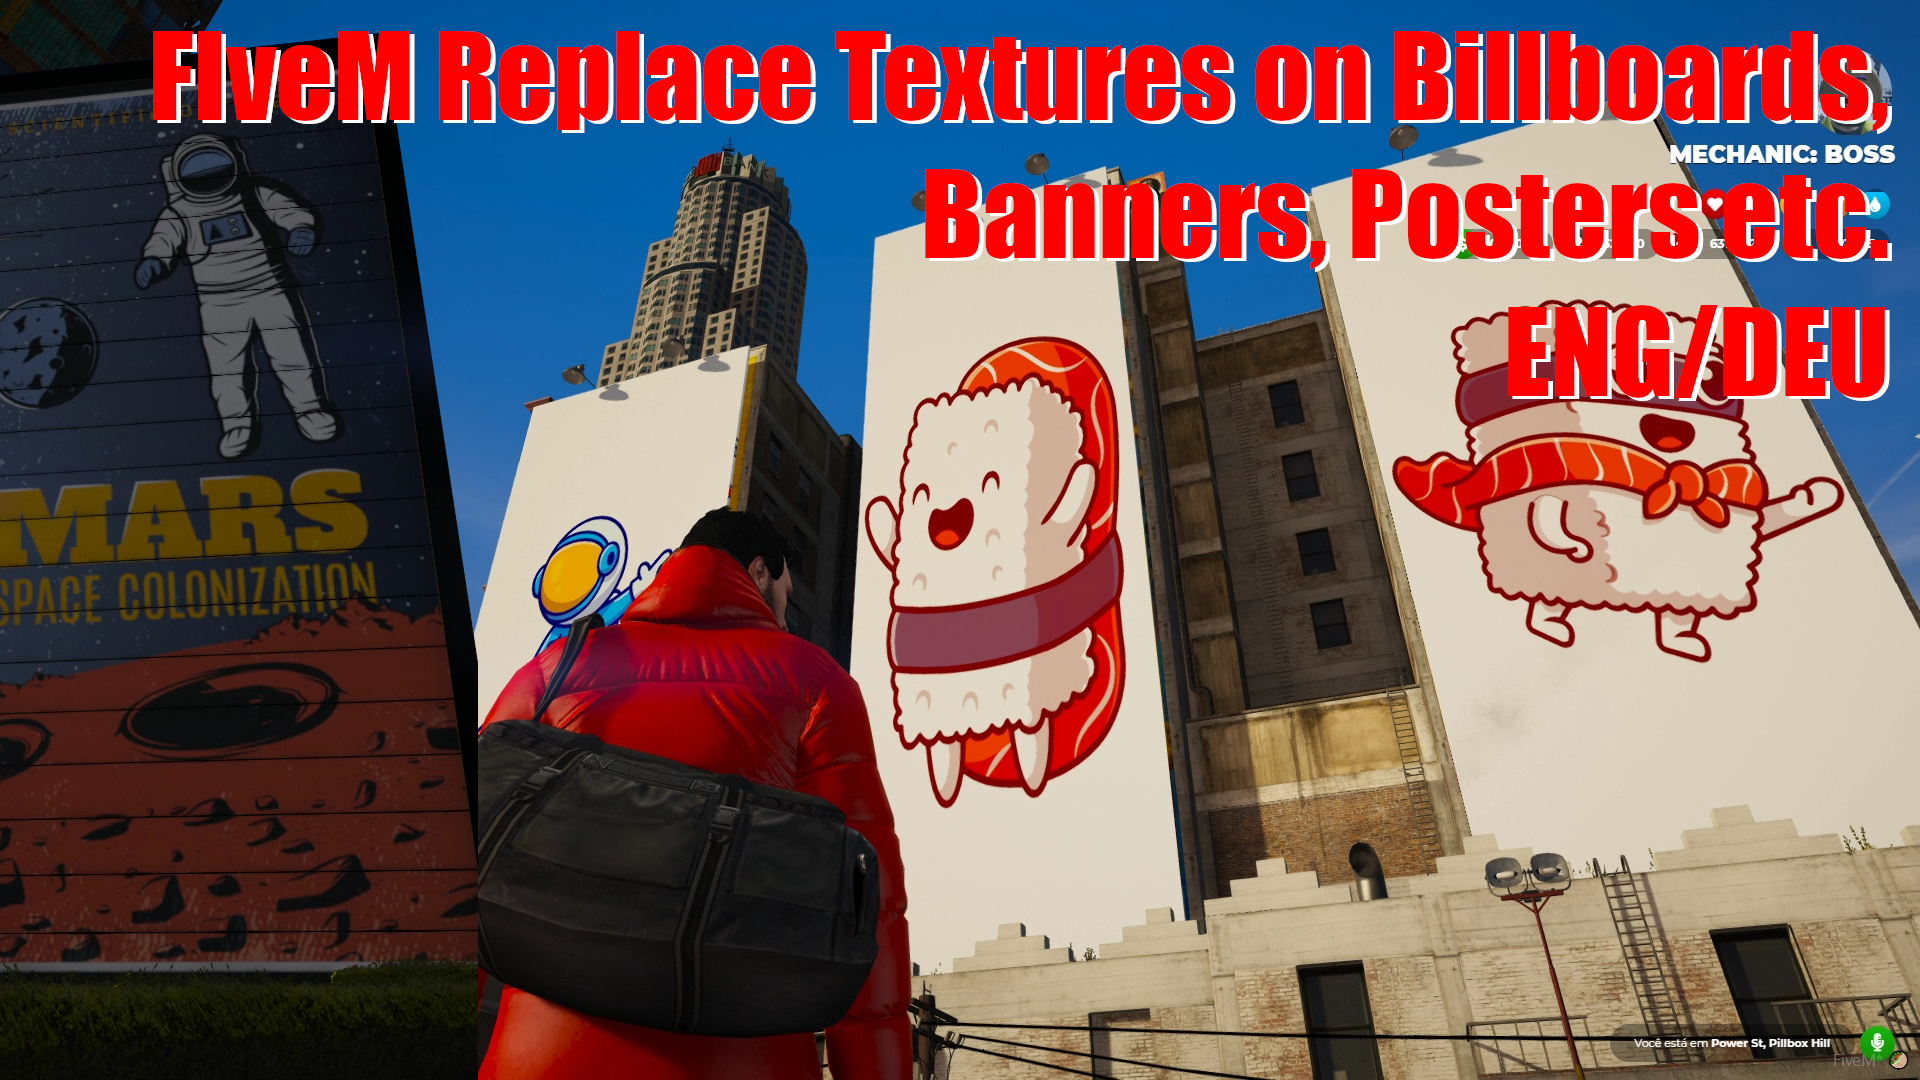 fivem replace textures on billboards banner posters etc rp scripts.